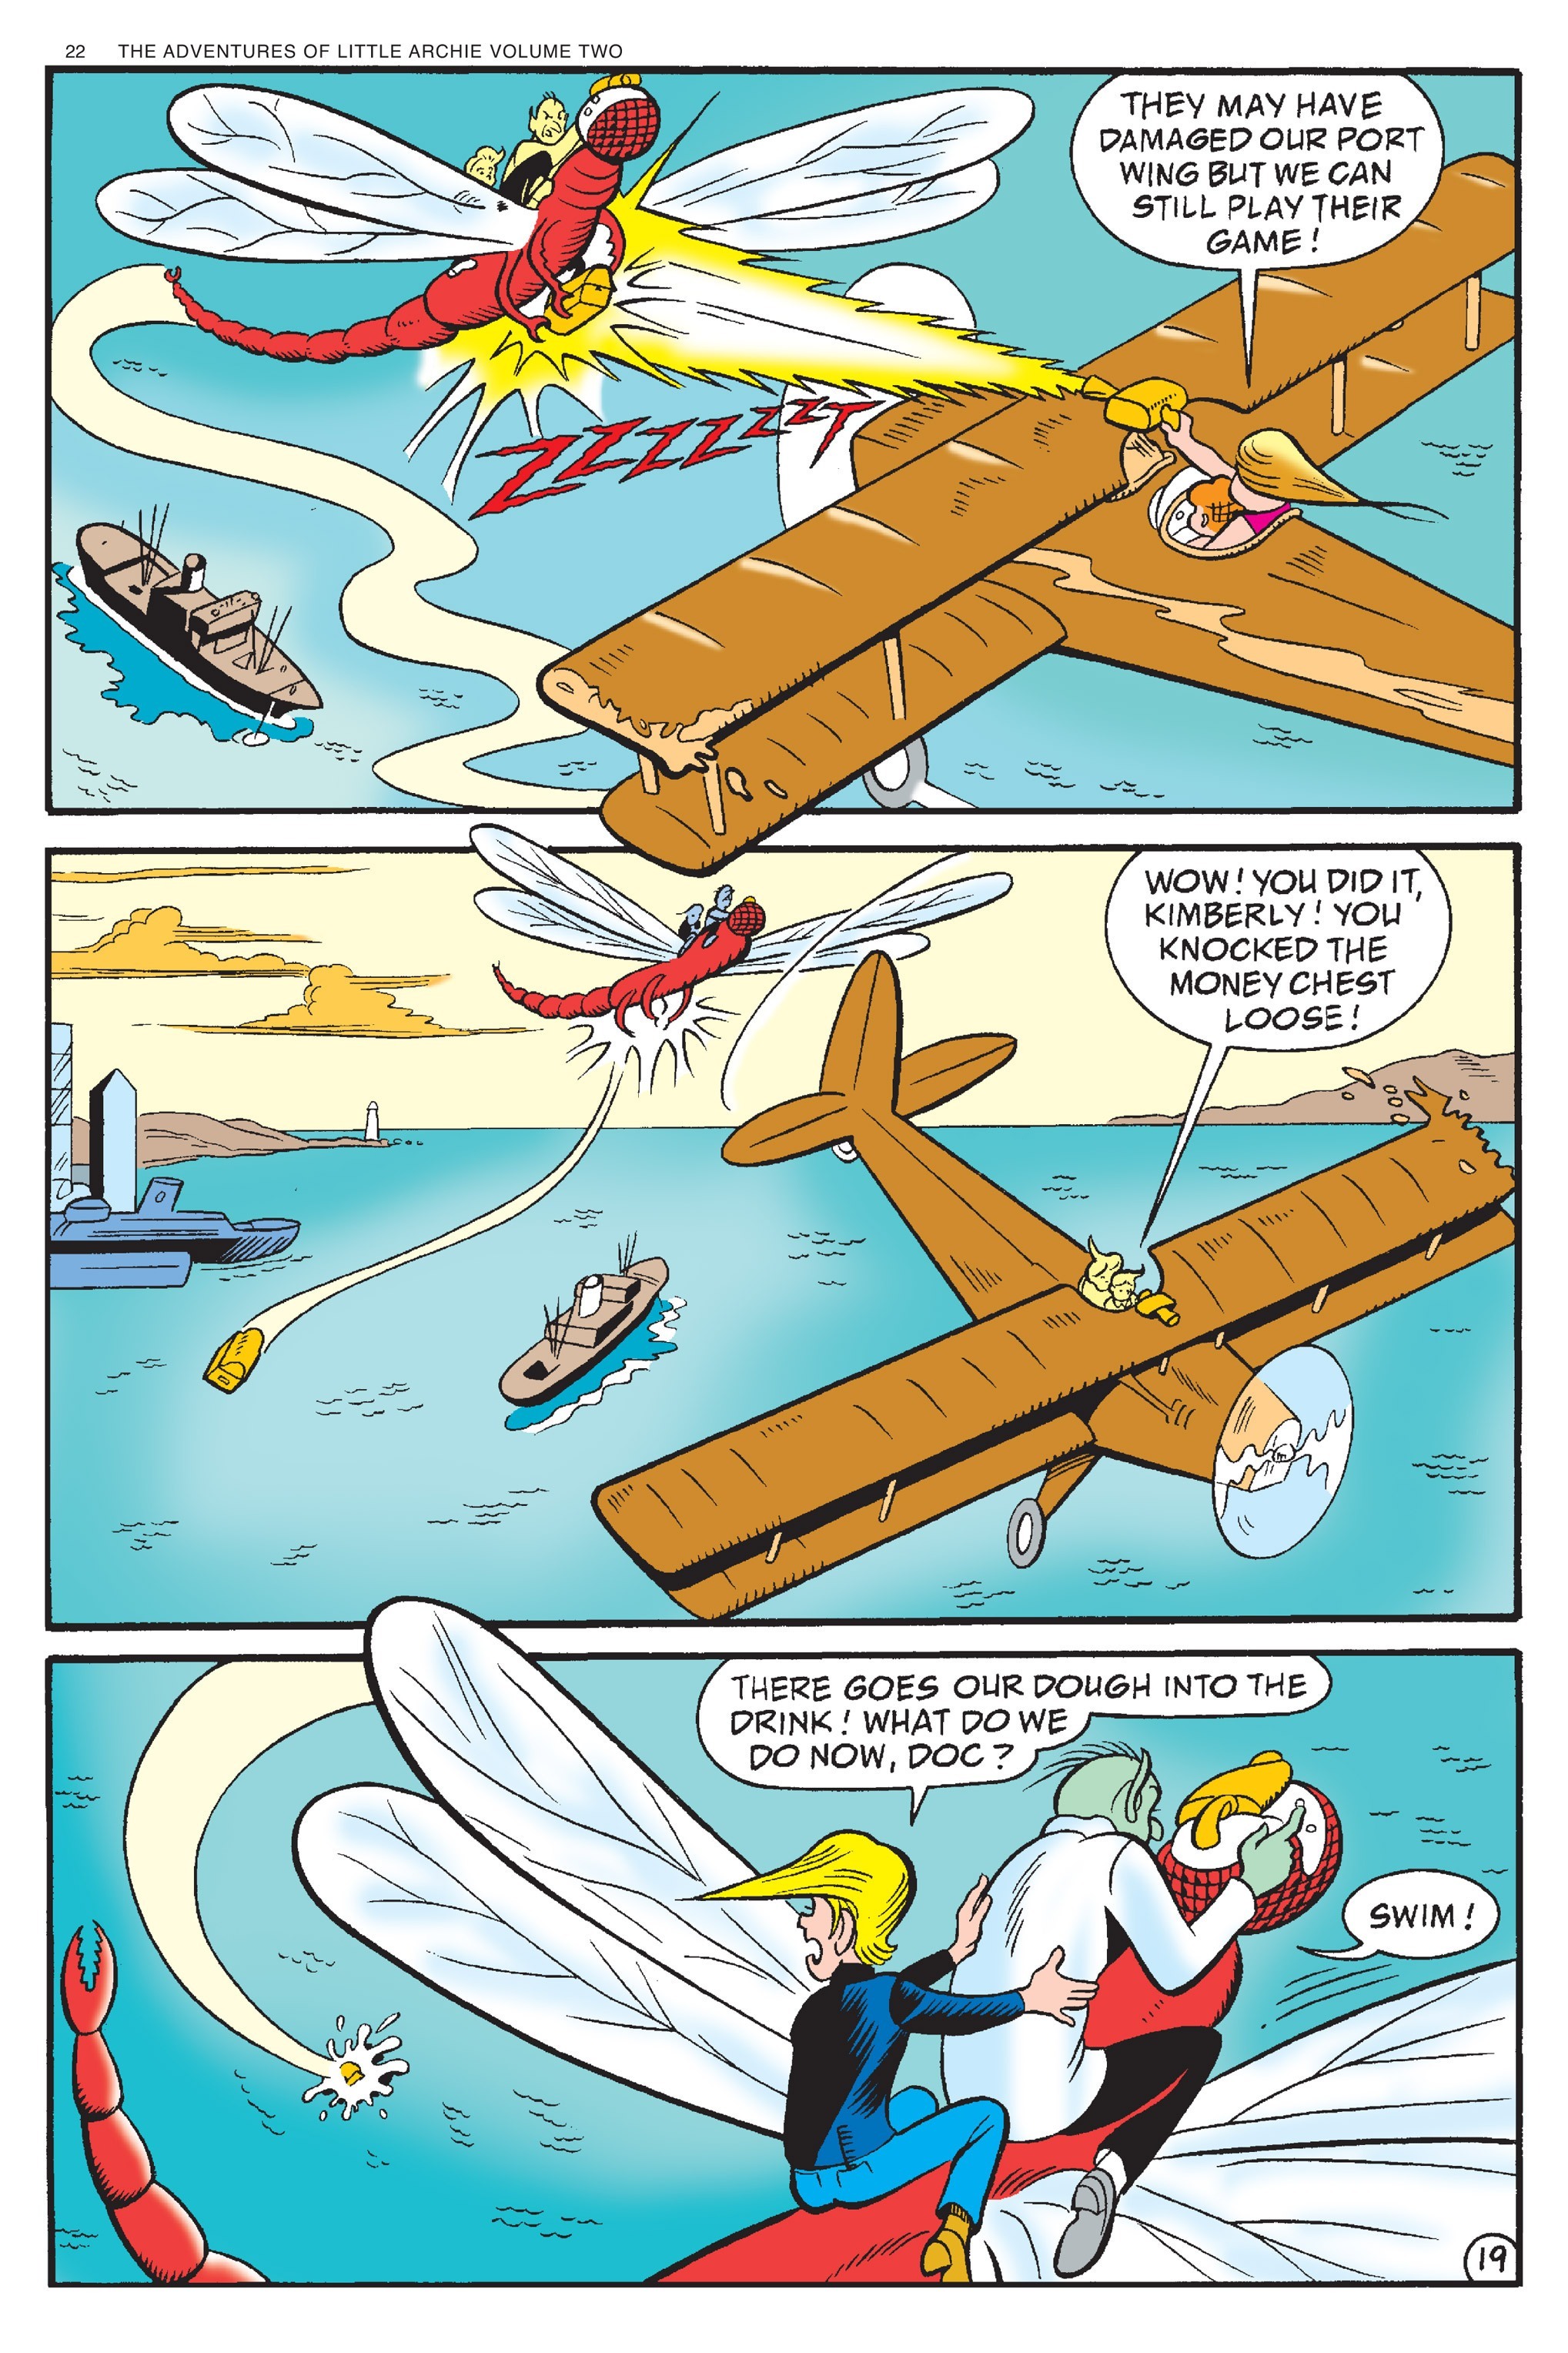 Read online Adventures of Little Archie comic -  Issue # TPB 2 - 23